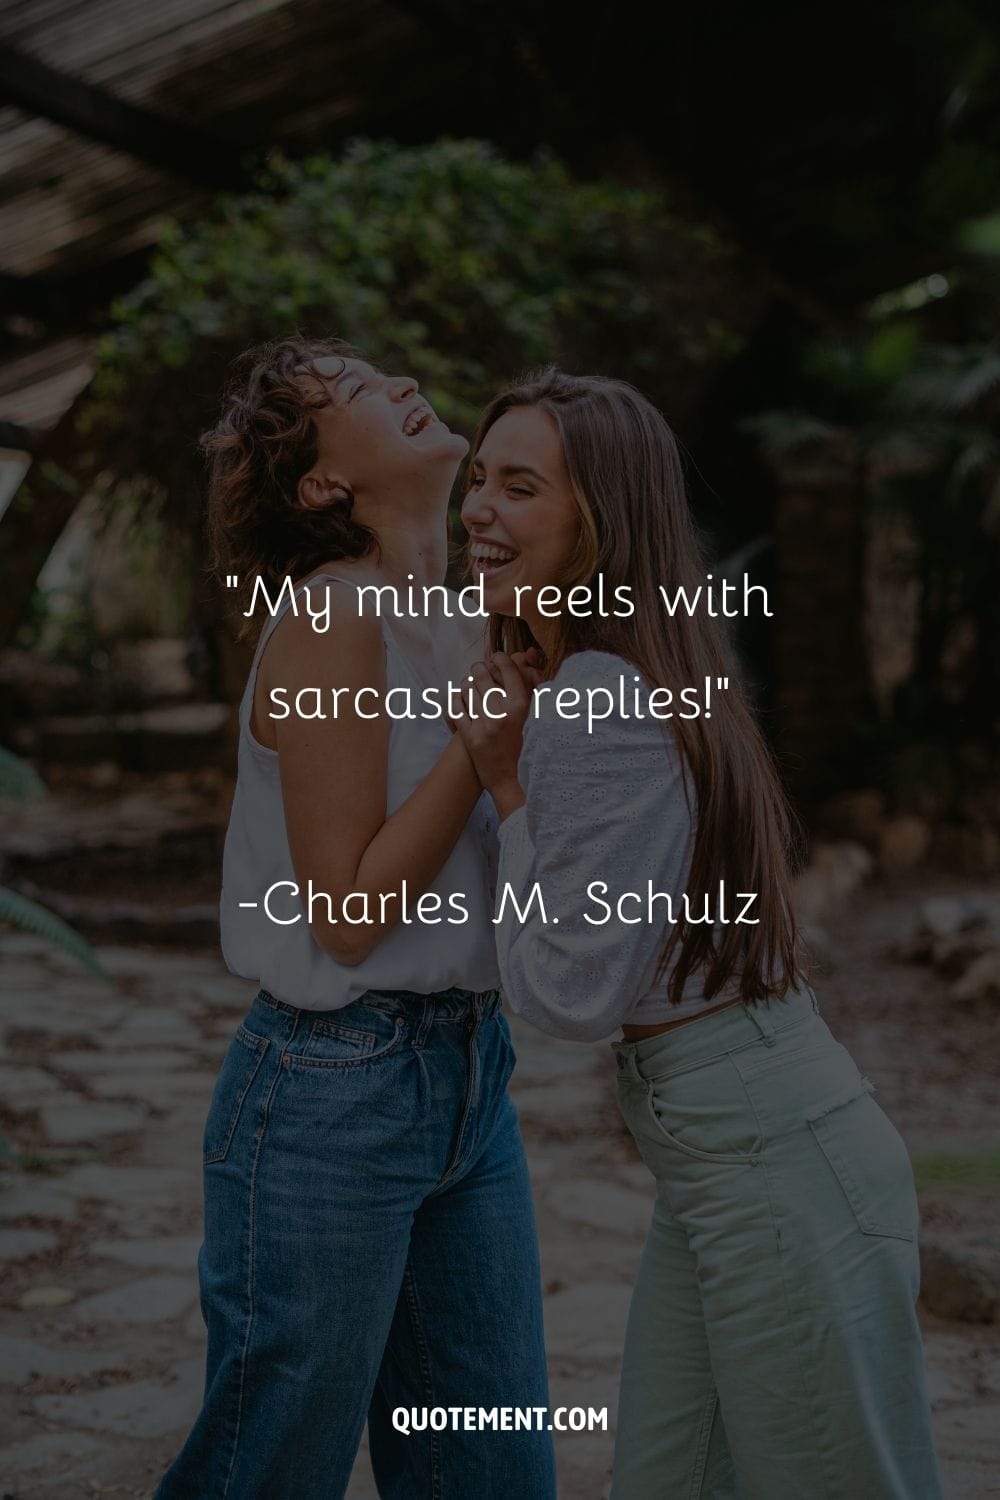 “My mind reels with sarcastic replies!” ― Charles M. Schulz, The Complete Peanuts, Vol. 7 1963-1964